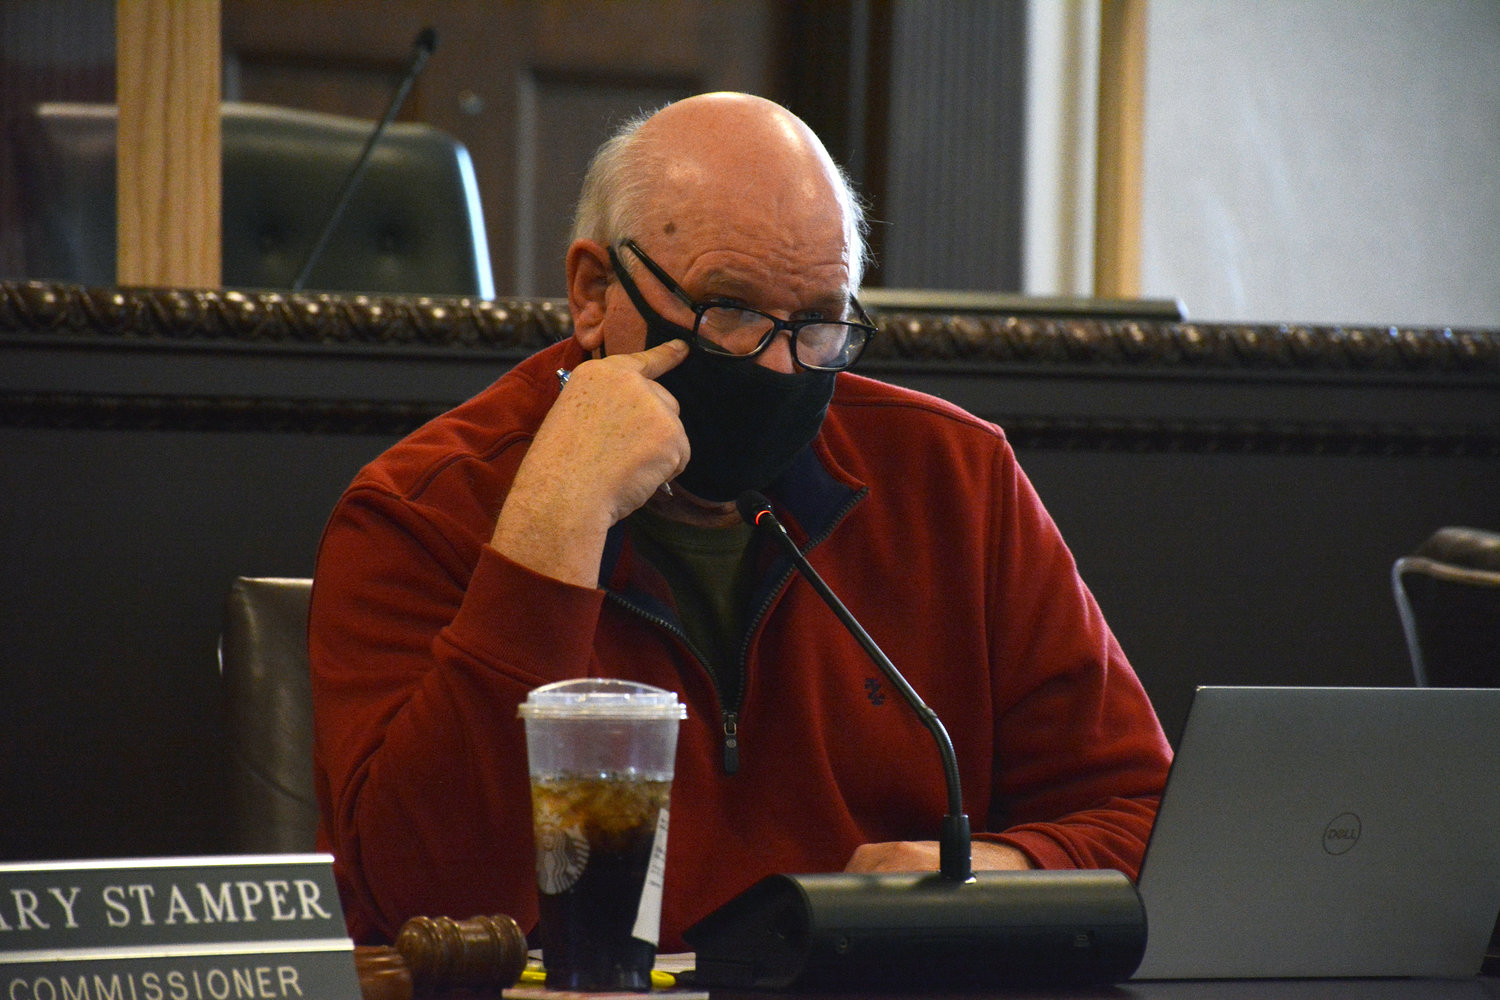 FILE PHOTO — Lewis County Commissioner Gary Stamper